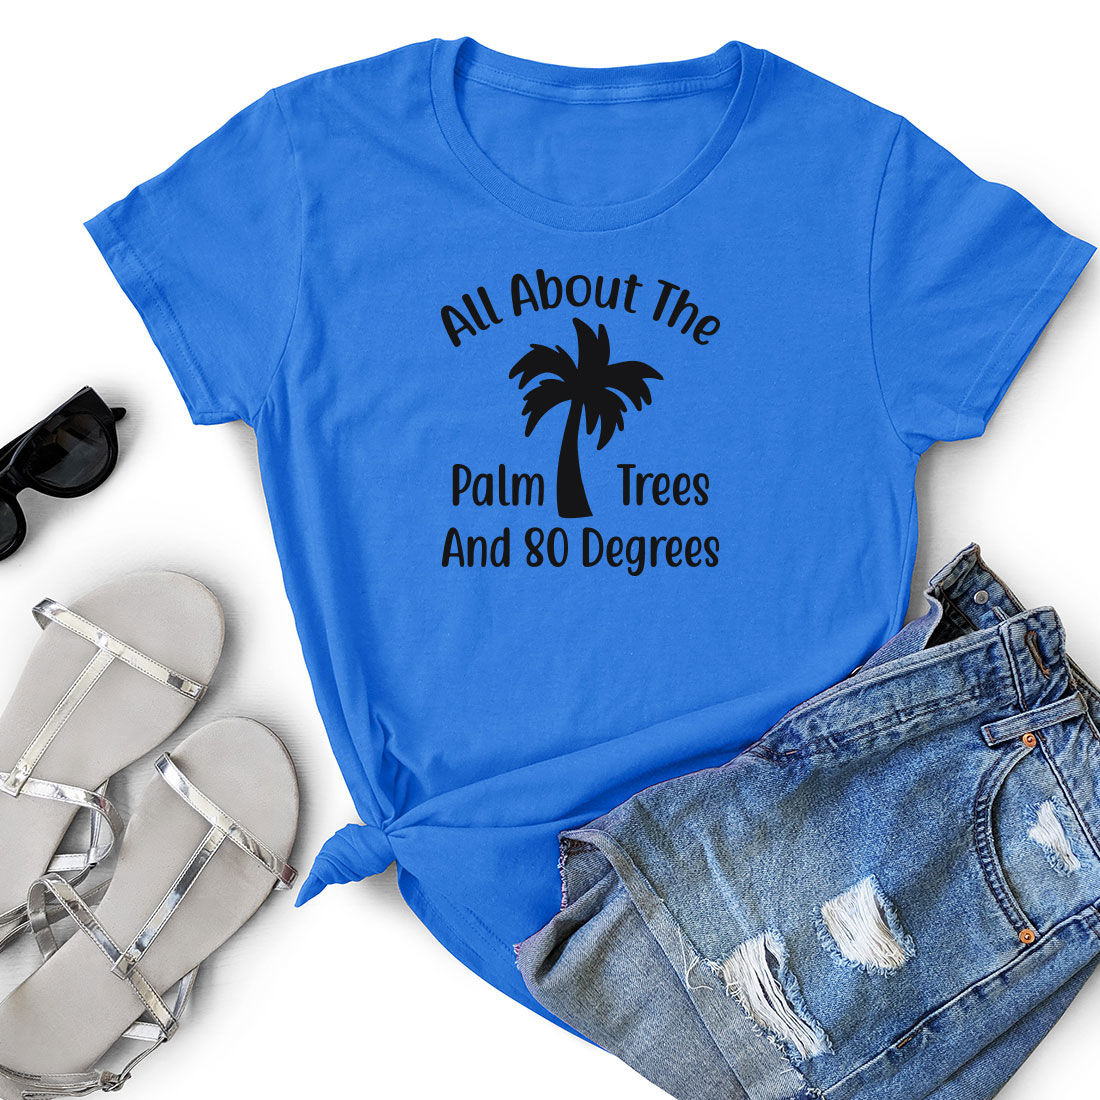 T - shirt that says palm trees and 80 degrees degrees degrees degrees degrees degrees.